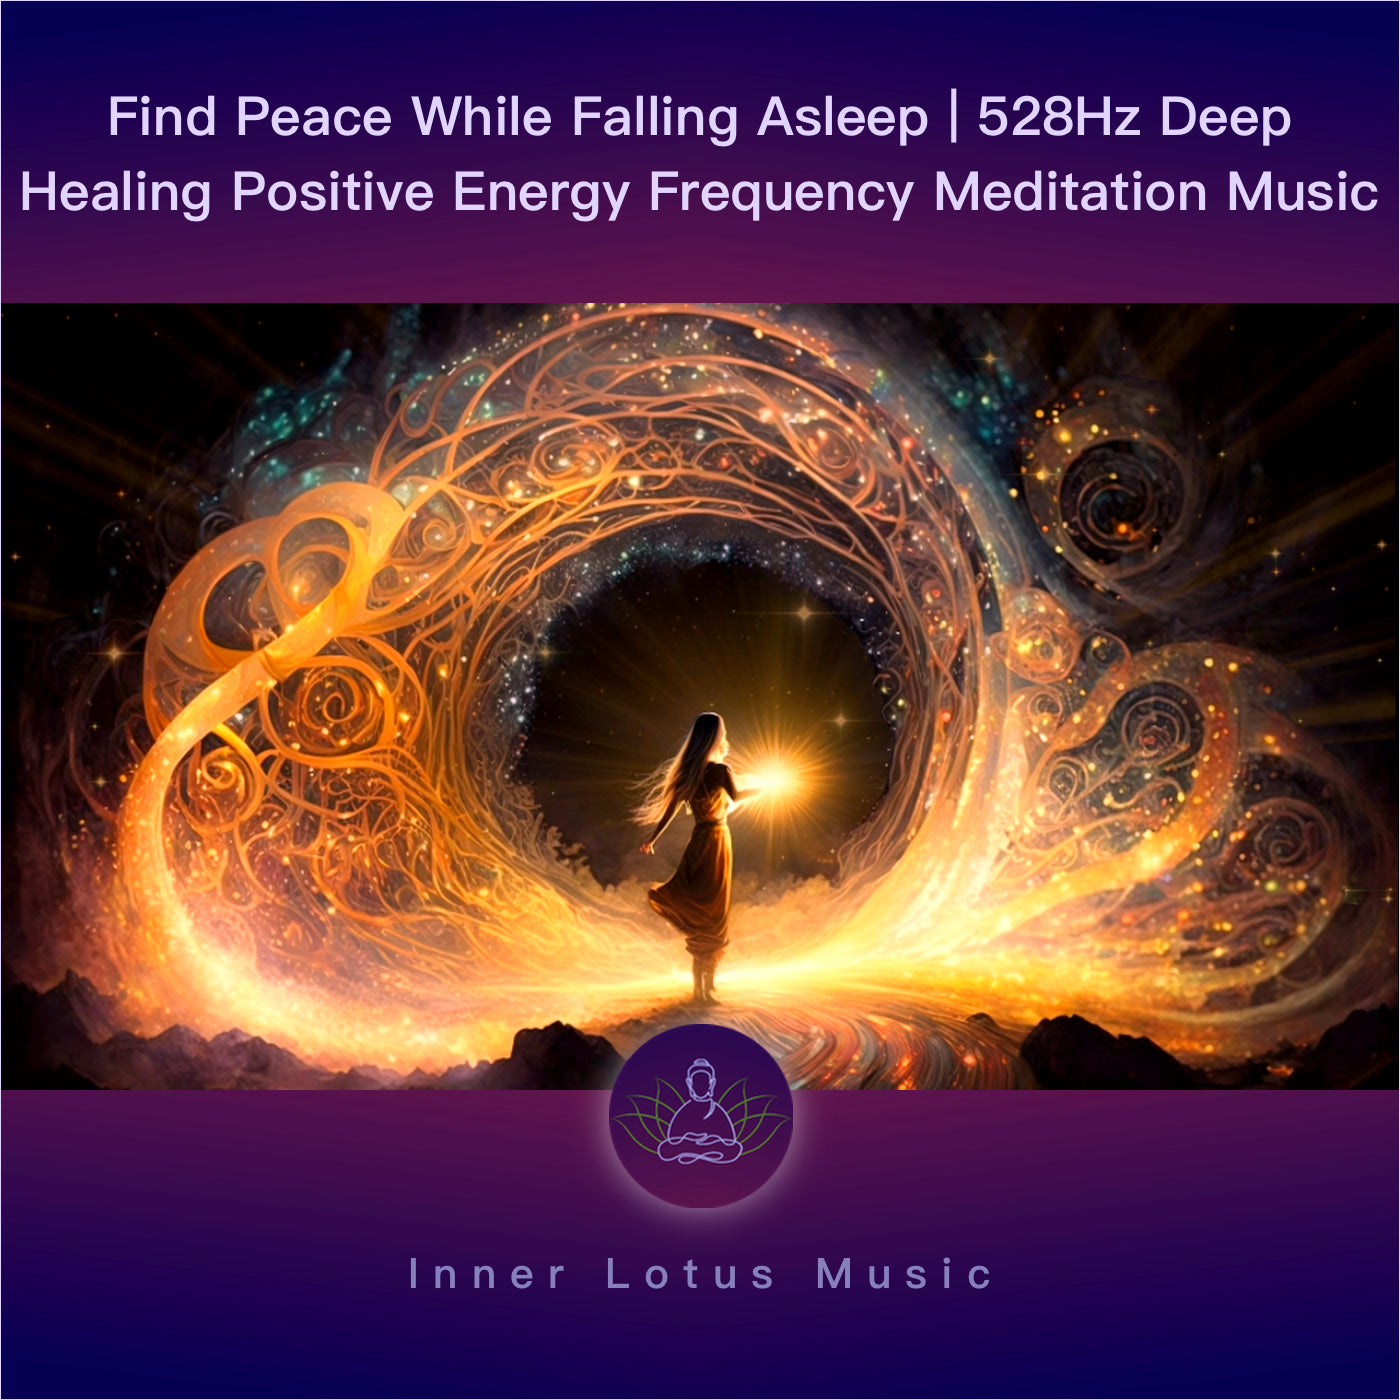 Find Peace While Falling Asleep | 528Hz Deep Healing Positive Energy Frequency Meditation Music